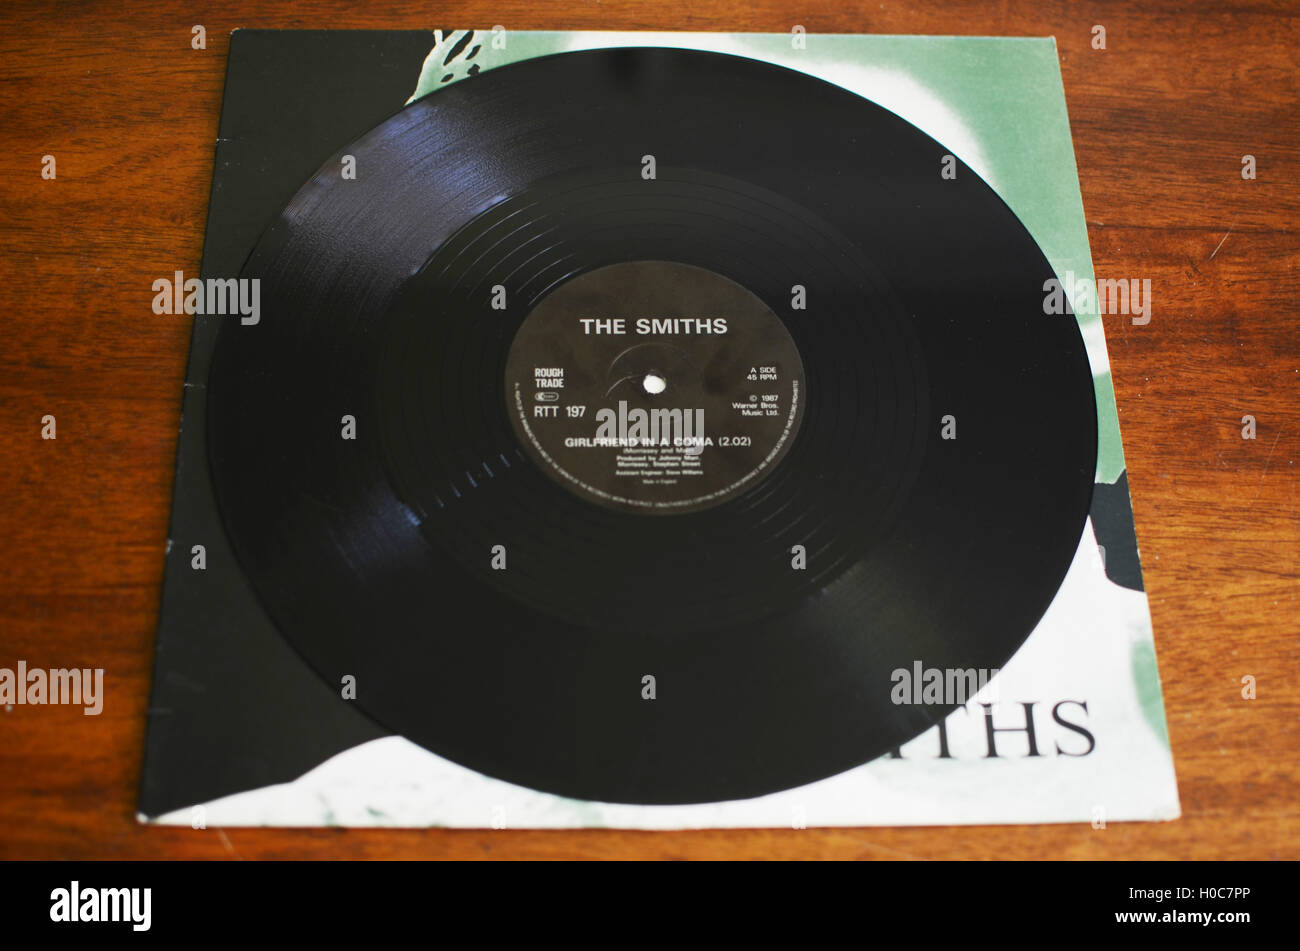 The Smiths, Girlfriend In A Coma, 12' vinyl Stock Photo